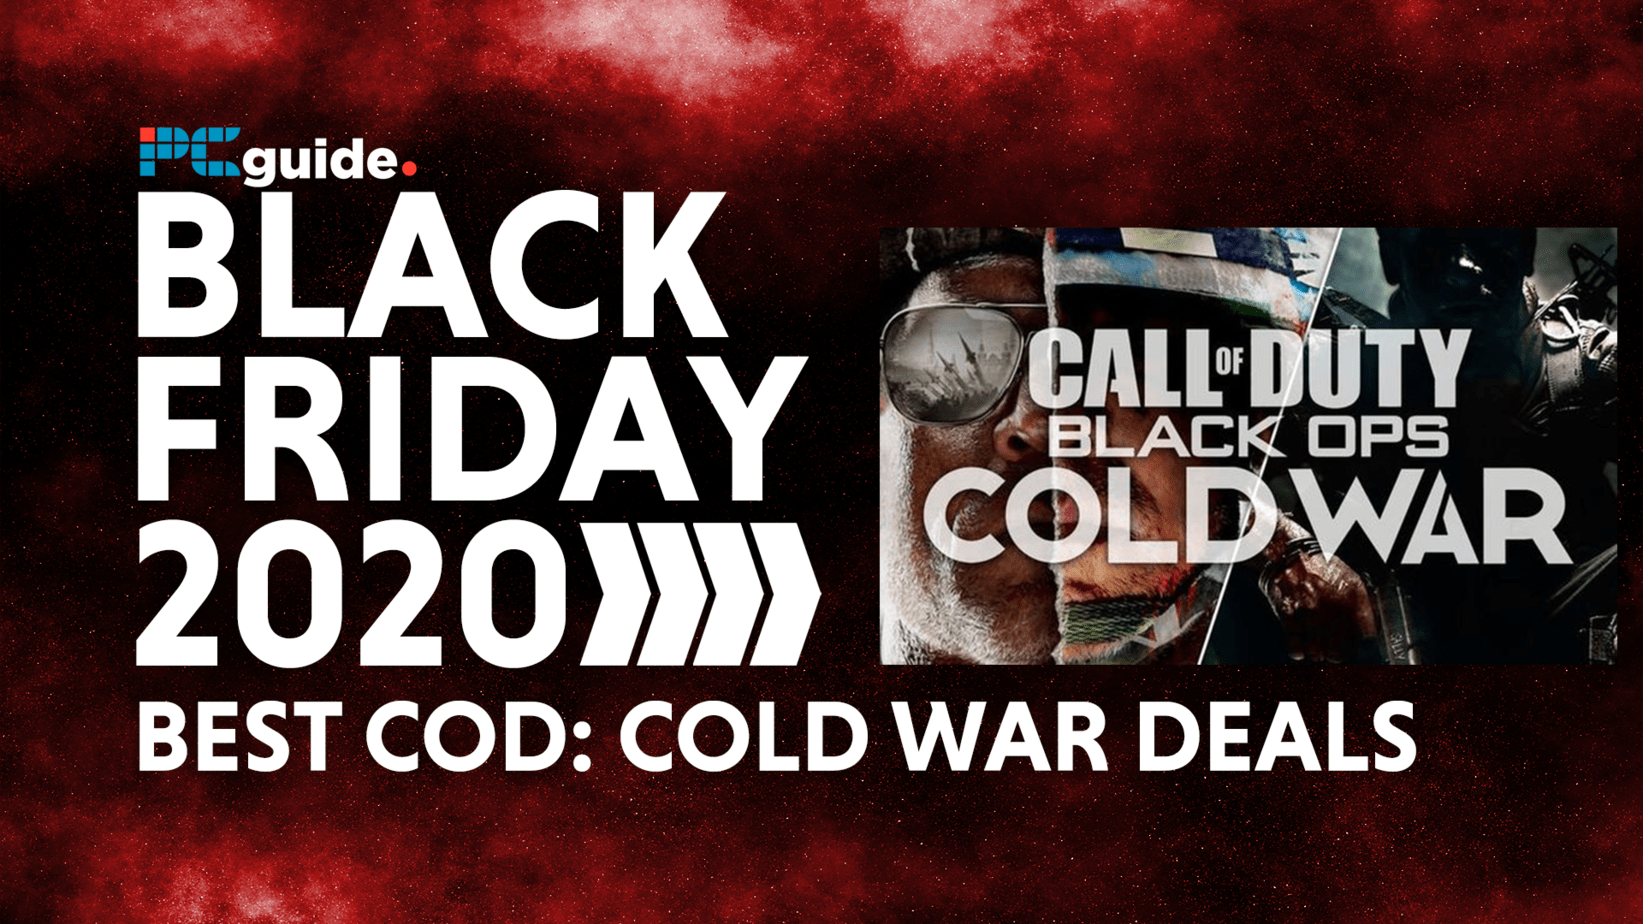 Call of Duty Black Ops Cold War Black Friday Deals 2020